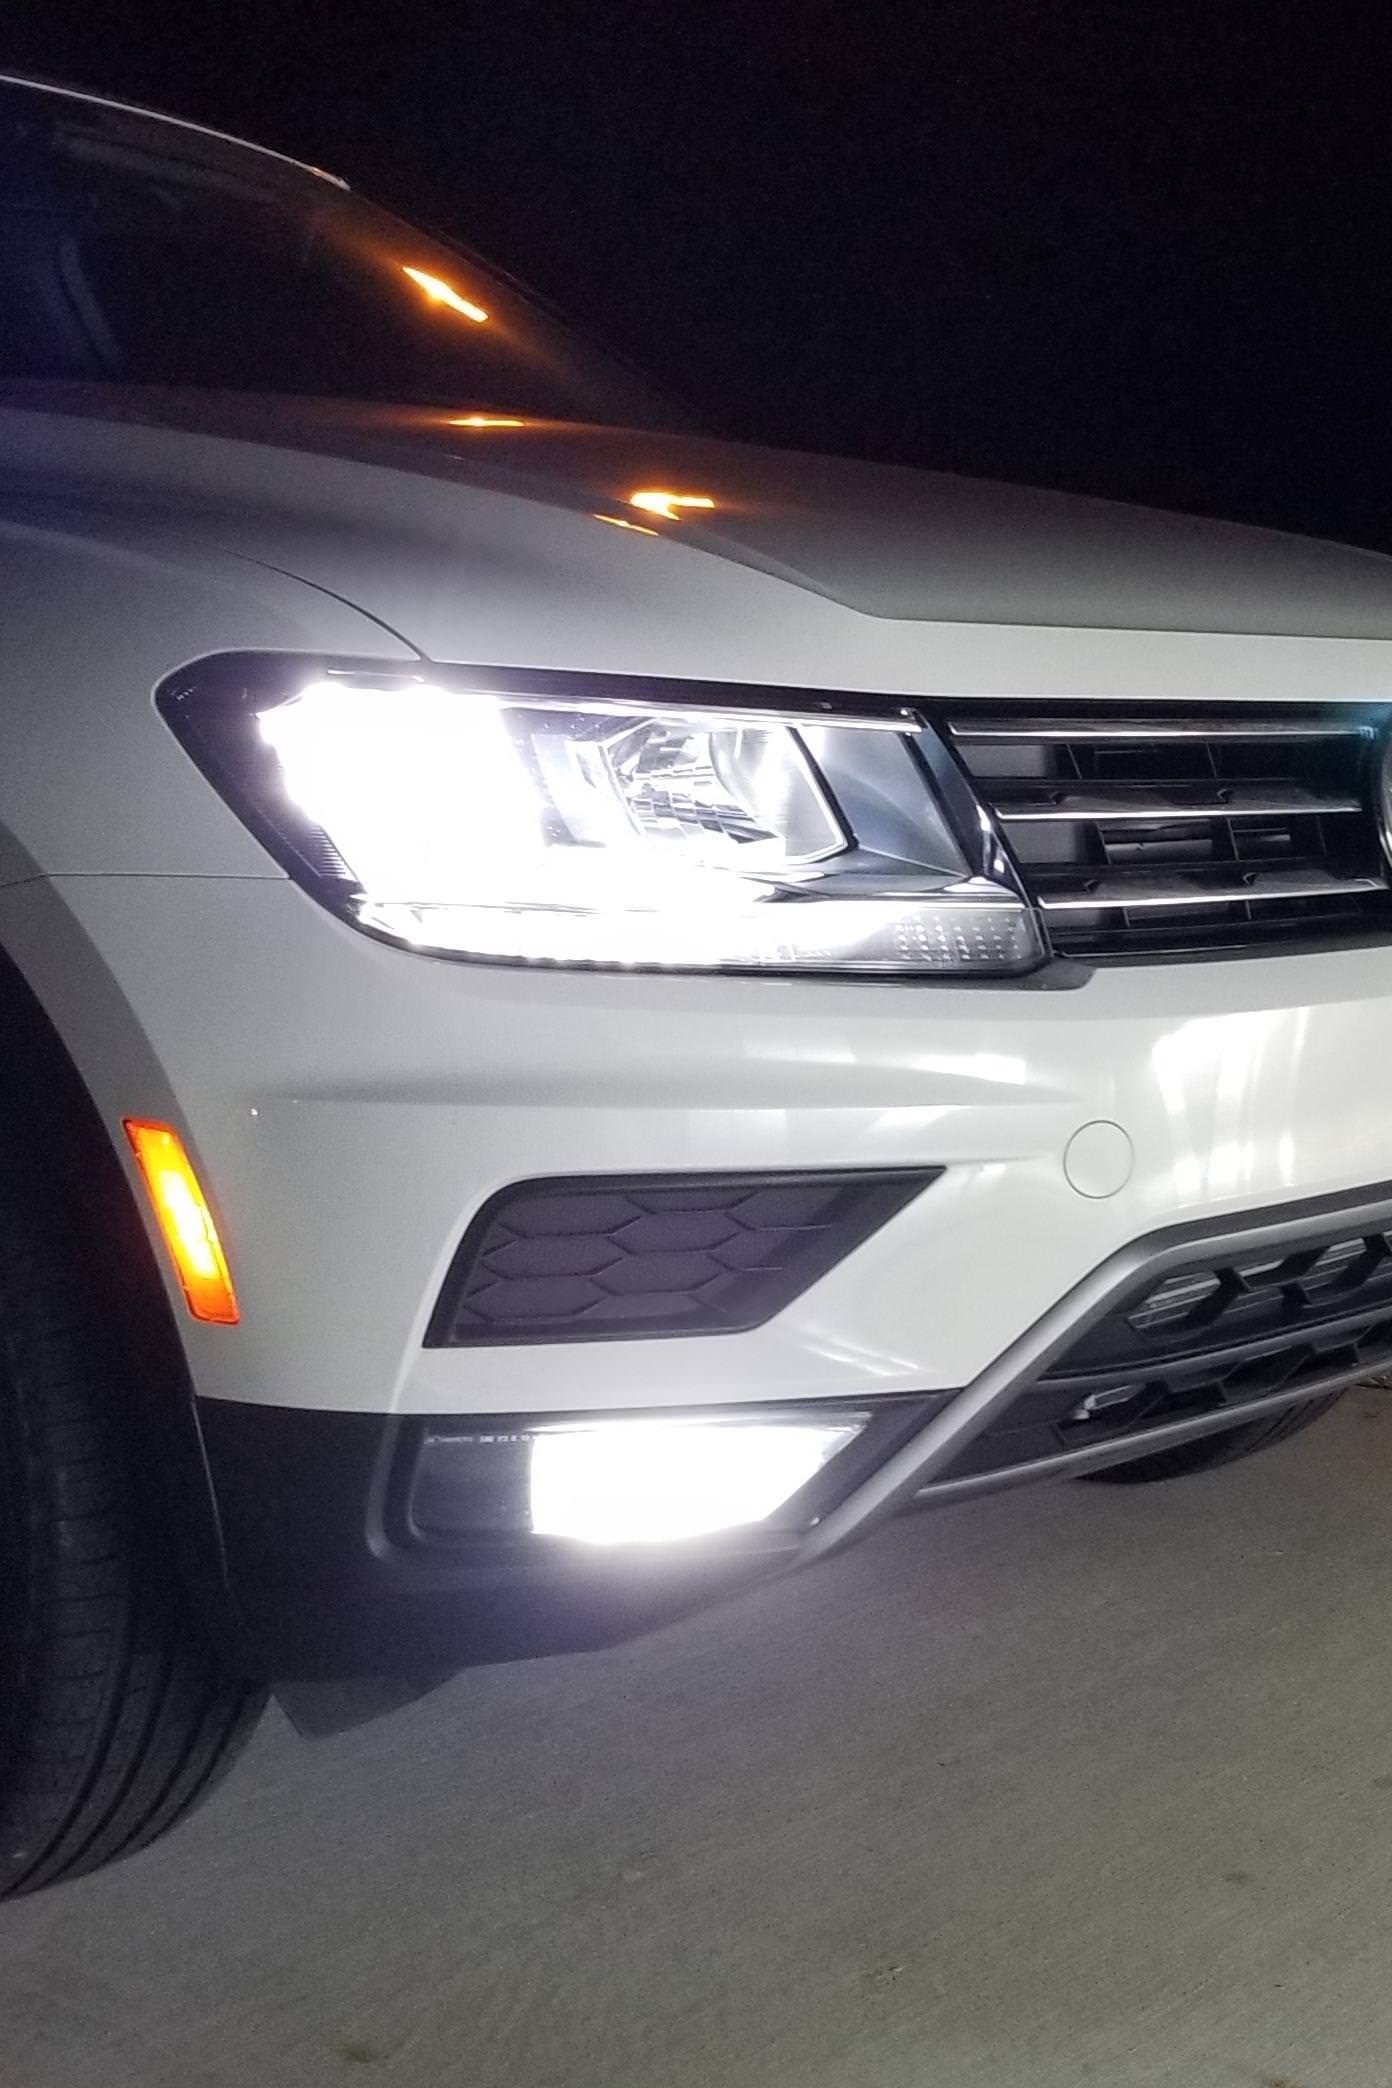 Image of LED Fog Light Kit - Clean White Color Temp with no glare Fits: Volkswagen Atlas